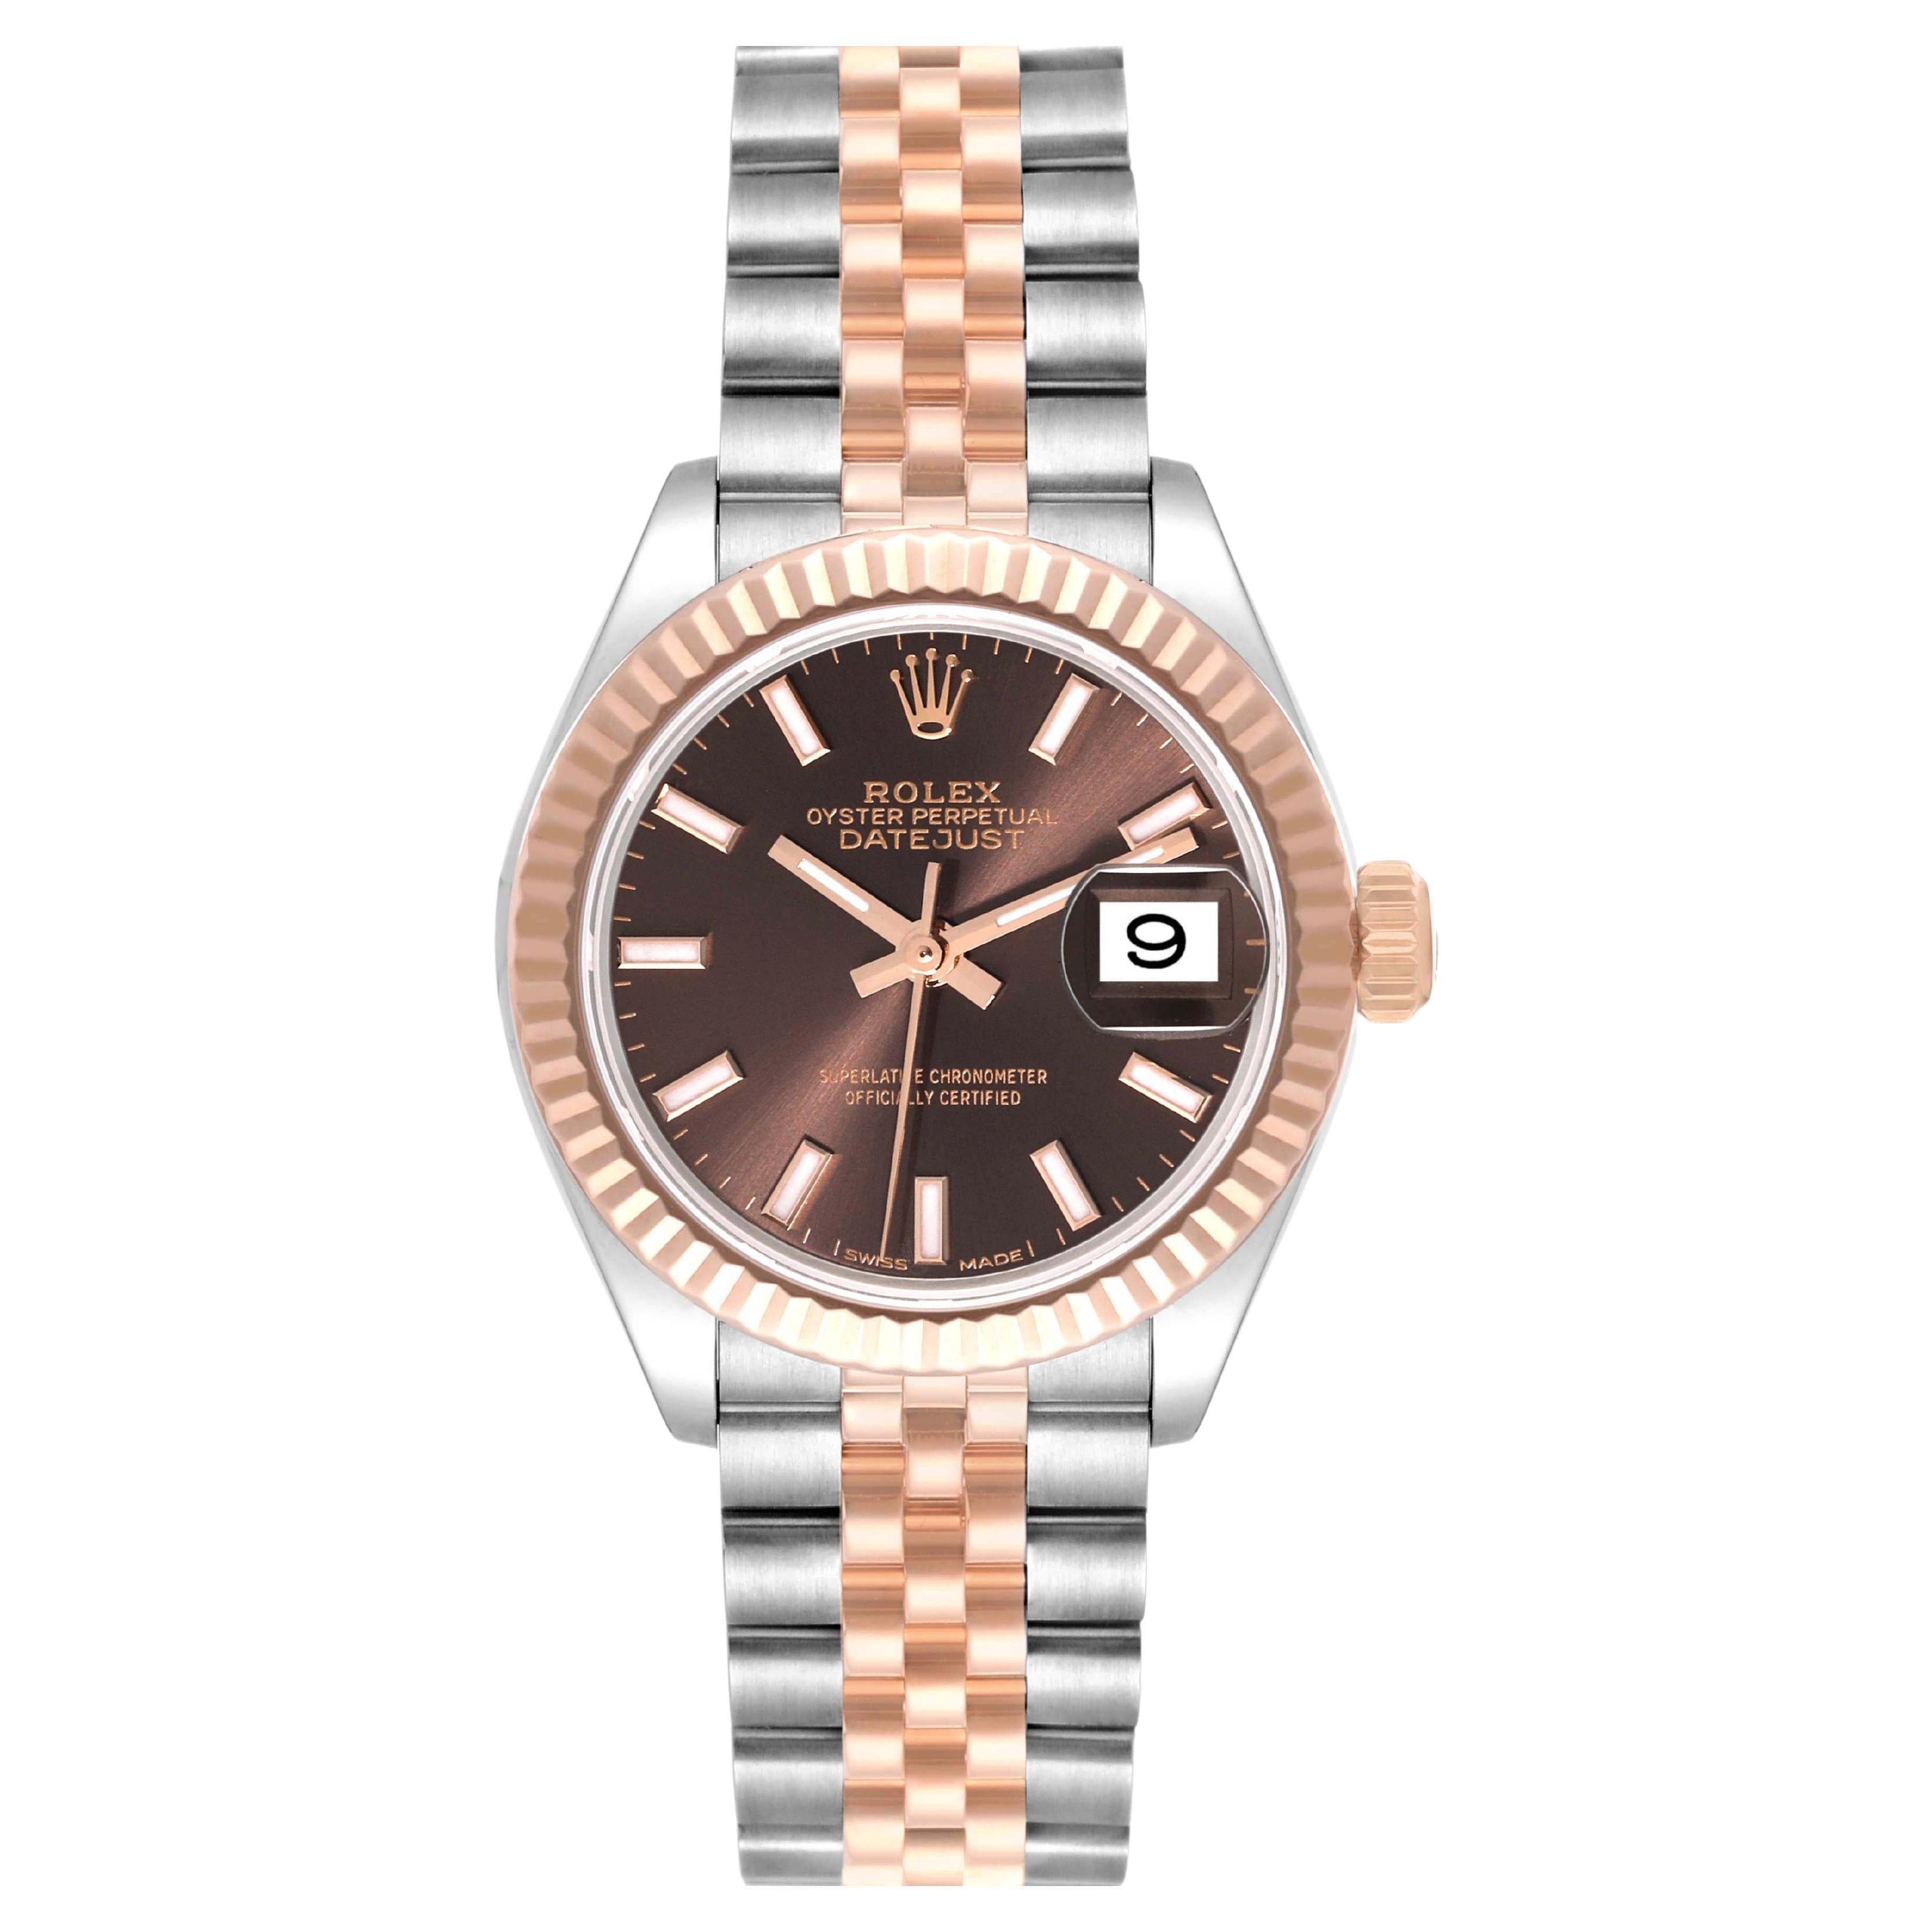 Rolex Datejust Chocolate Brown Dial Steel Rose Gold Ladies Watch 279171 Box Card